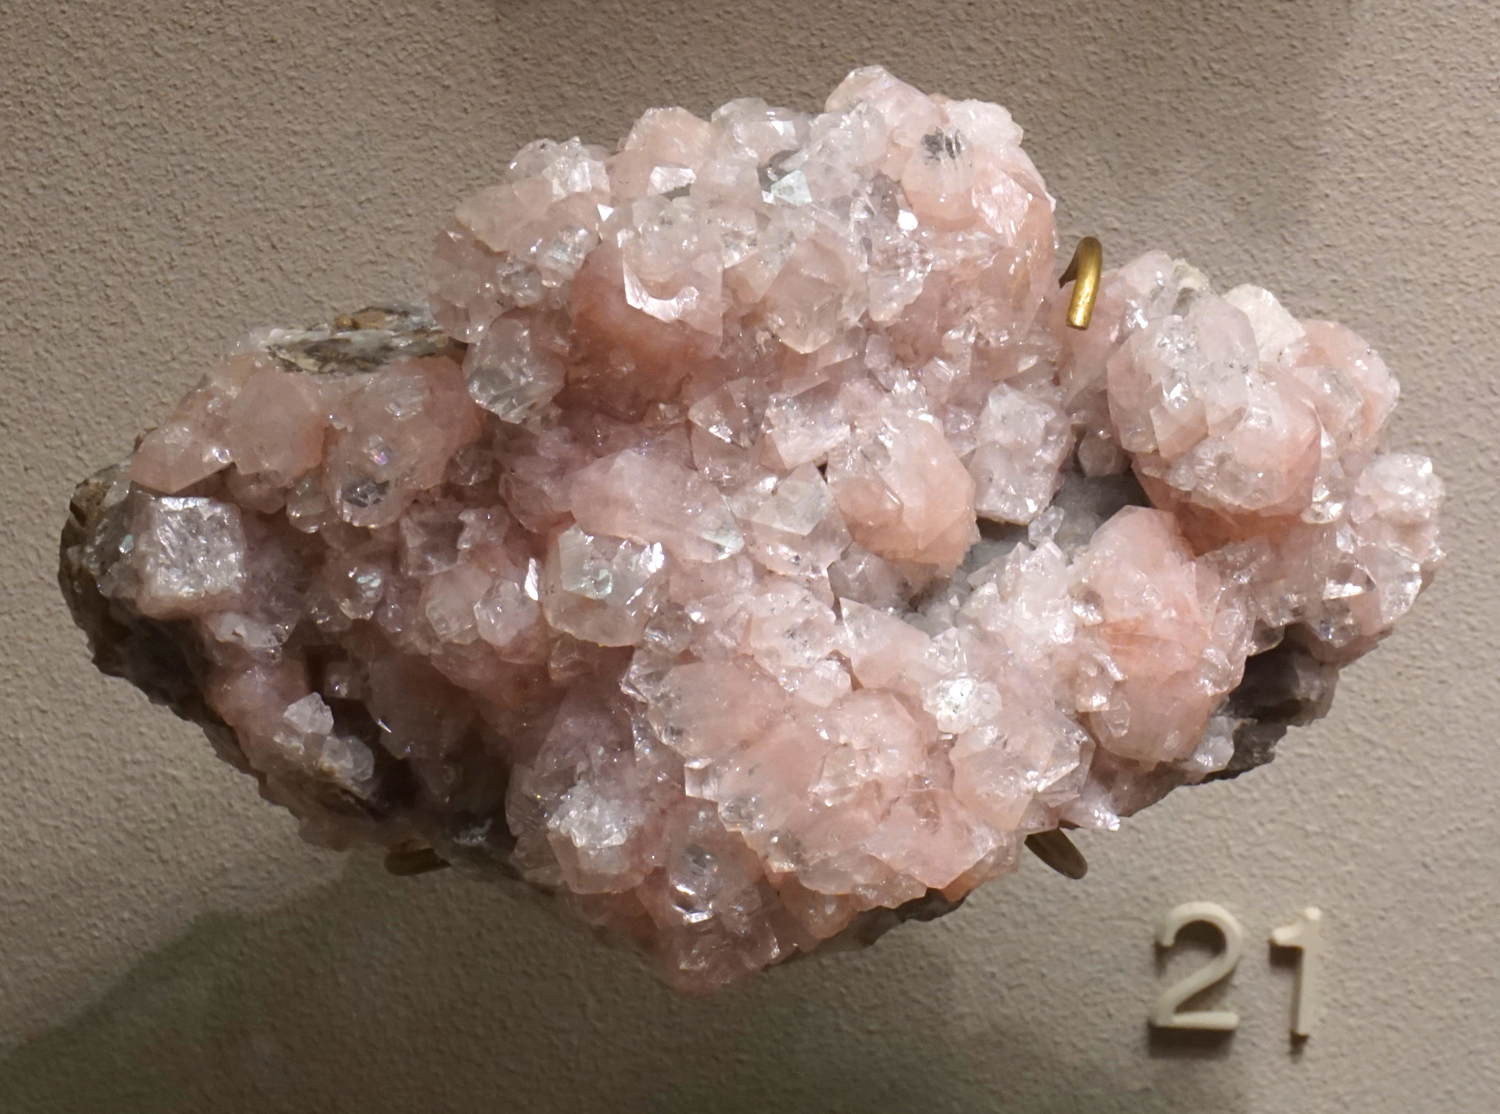 Pink Apophyllite Crystal Cluster from St. Andreasberg, Harz Mountains, Lower Saxony, Germany